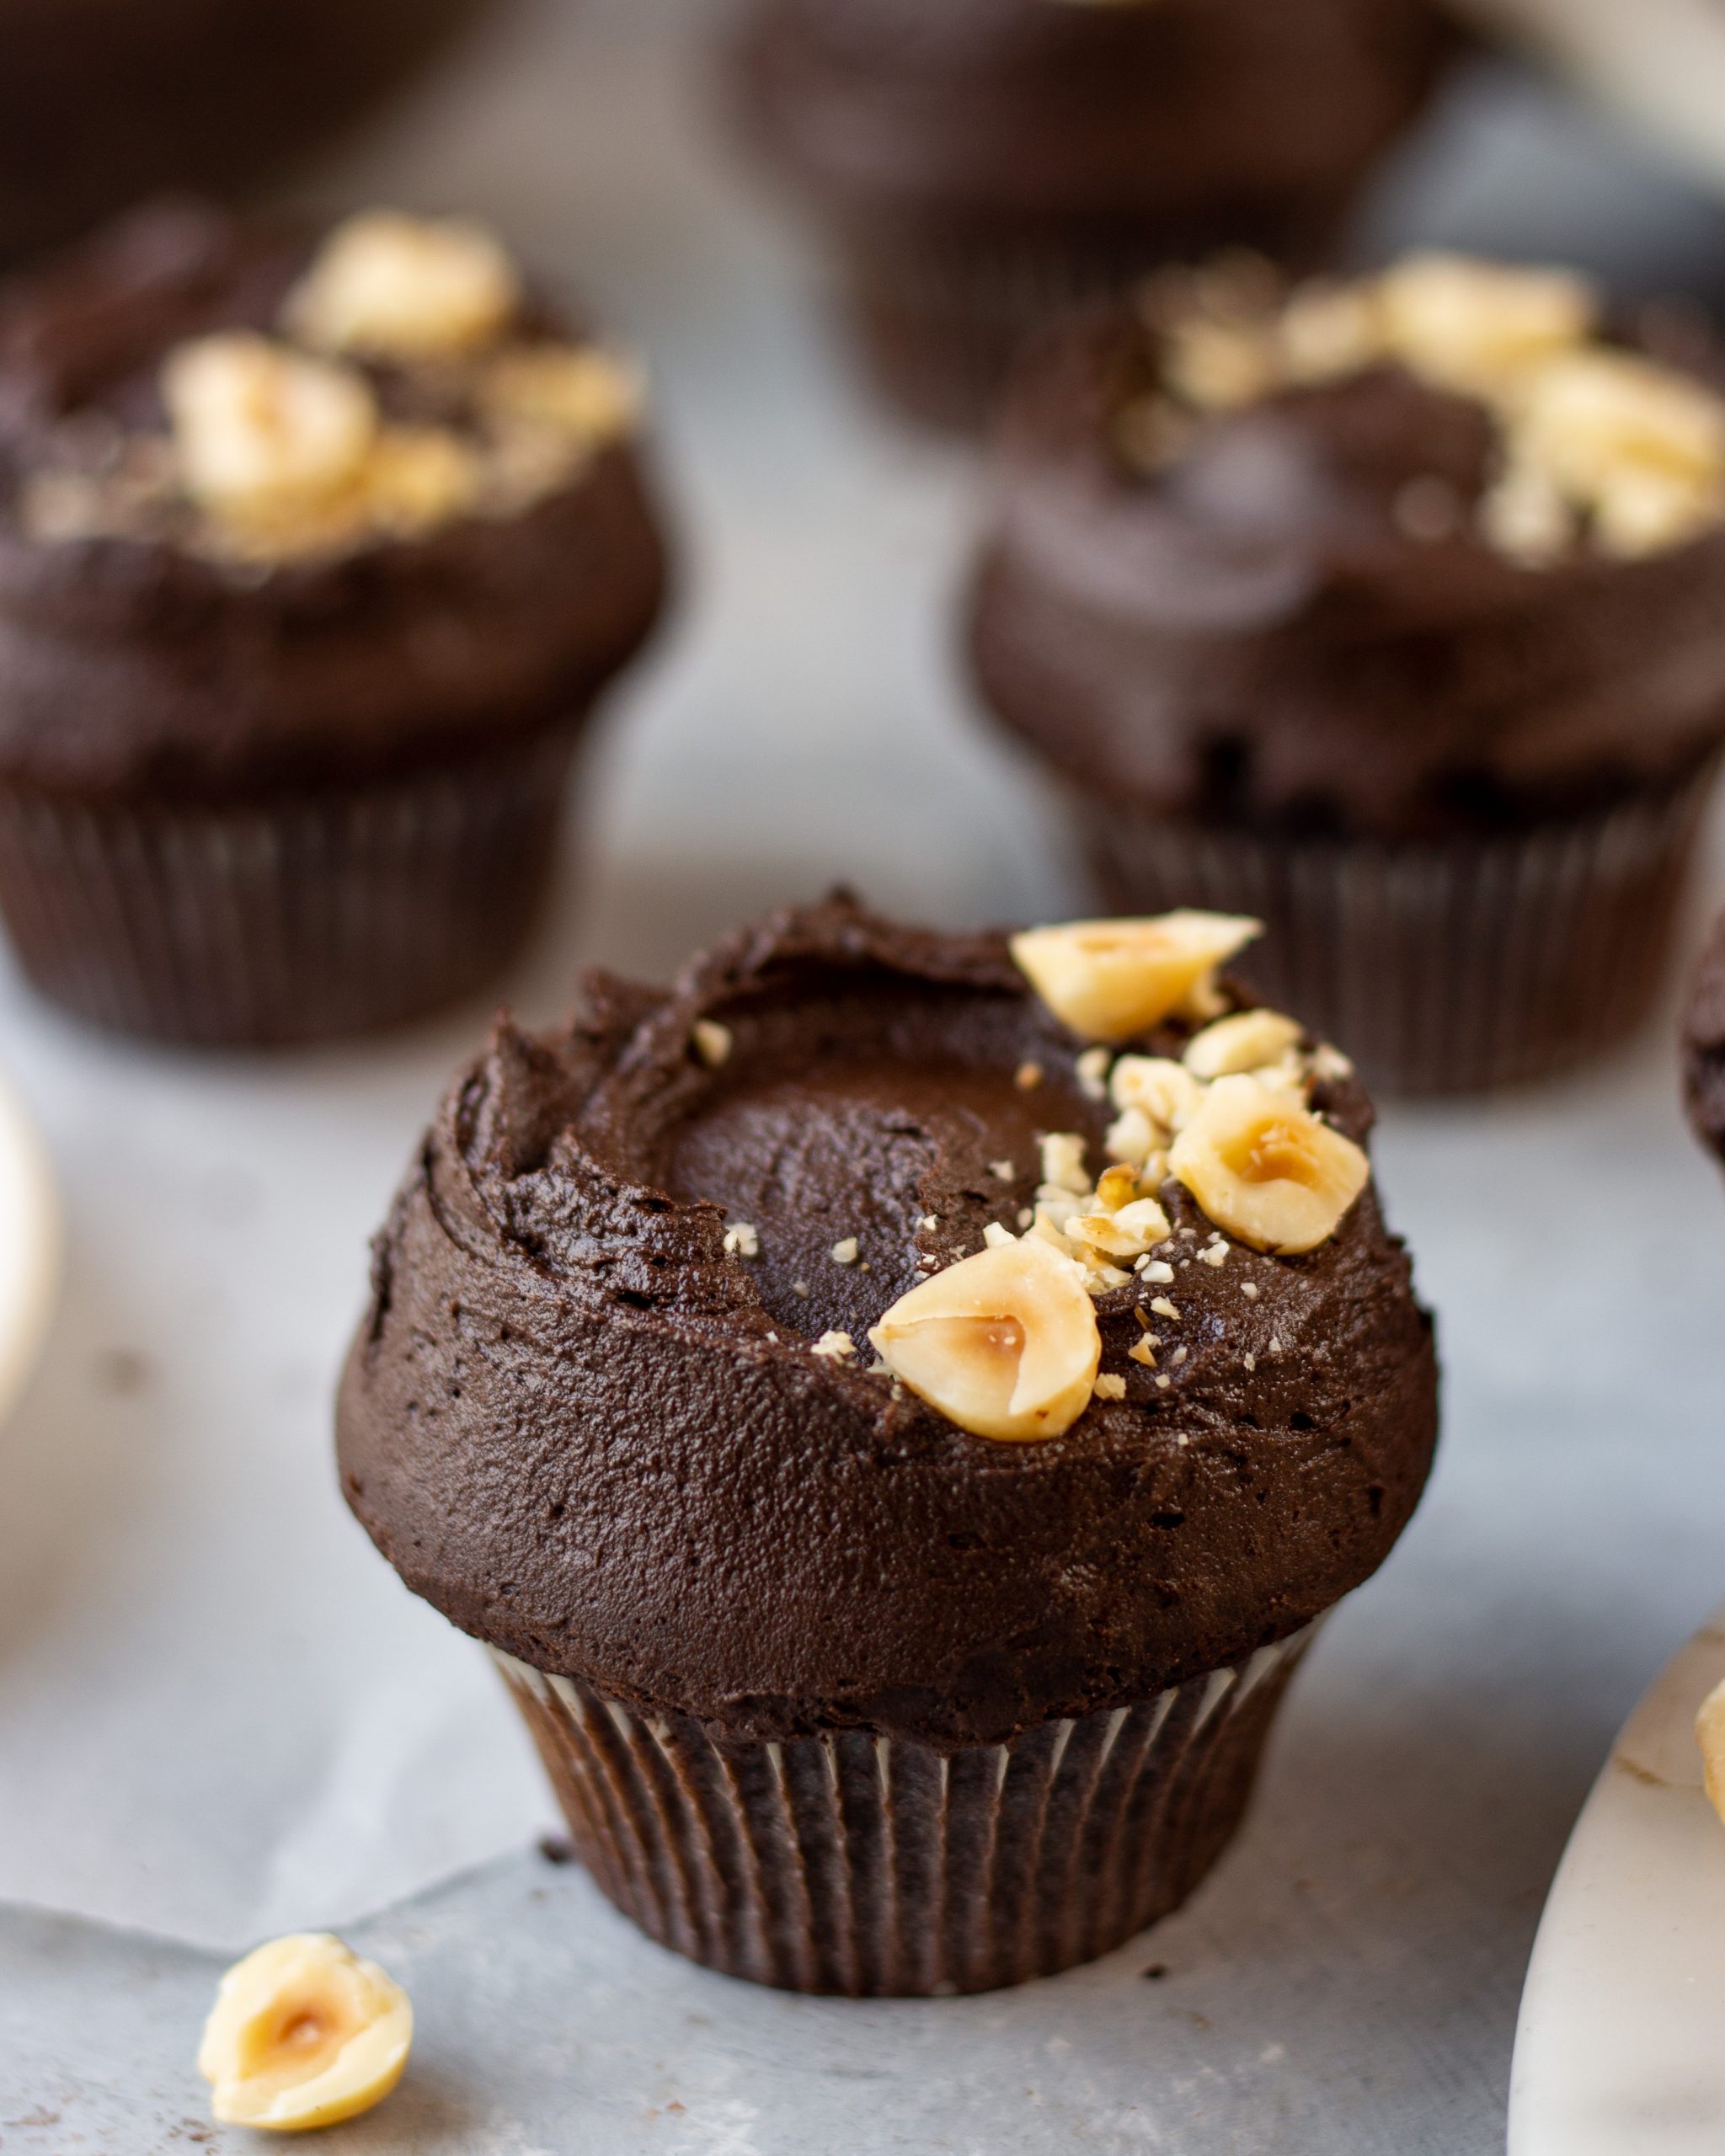 Chocolate Cupcakes - The BEST Ever Easy Recipe!